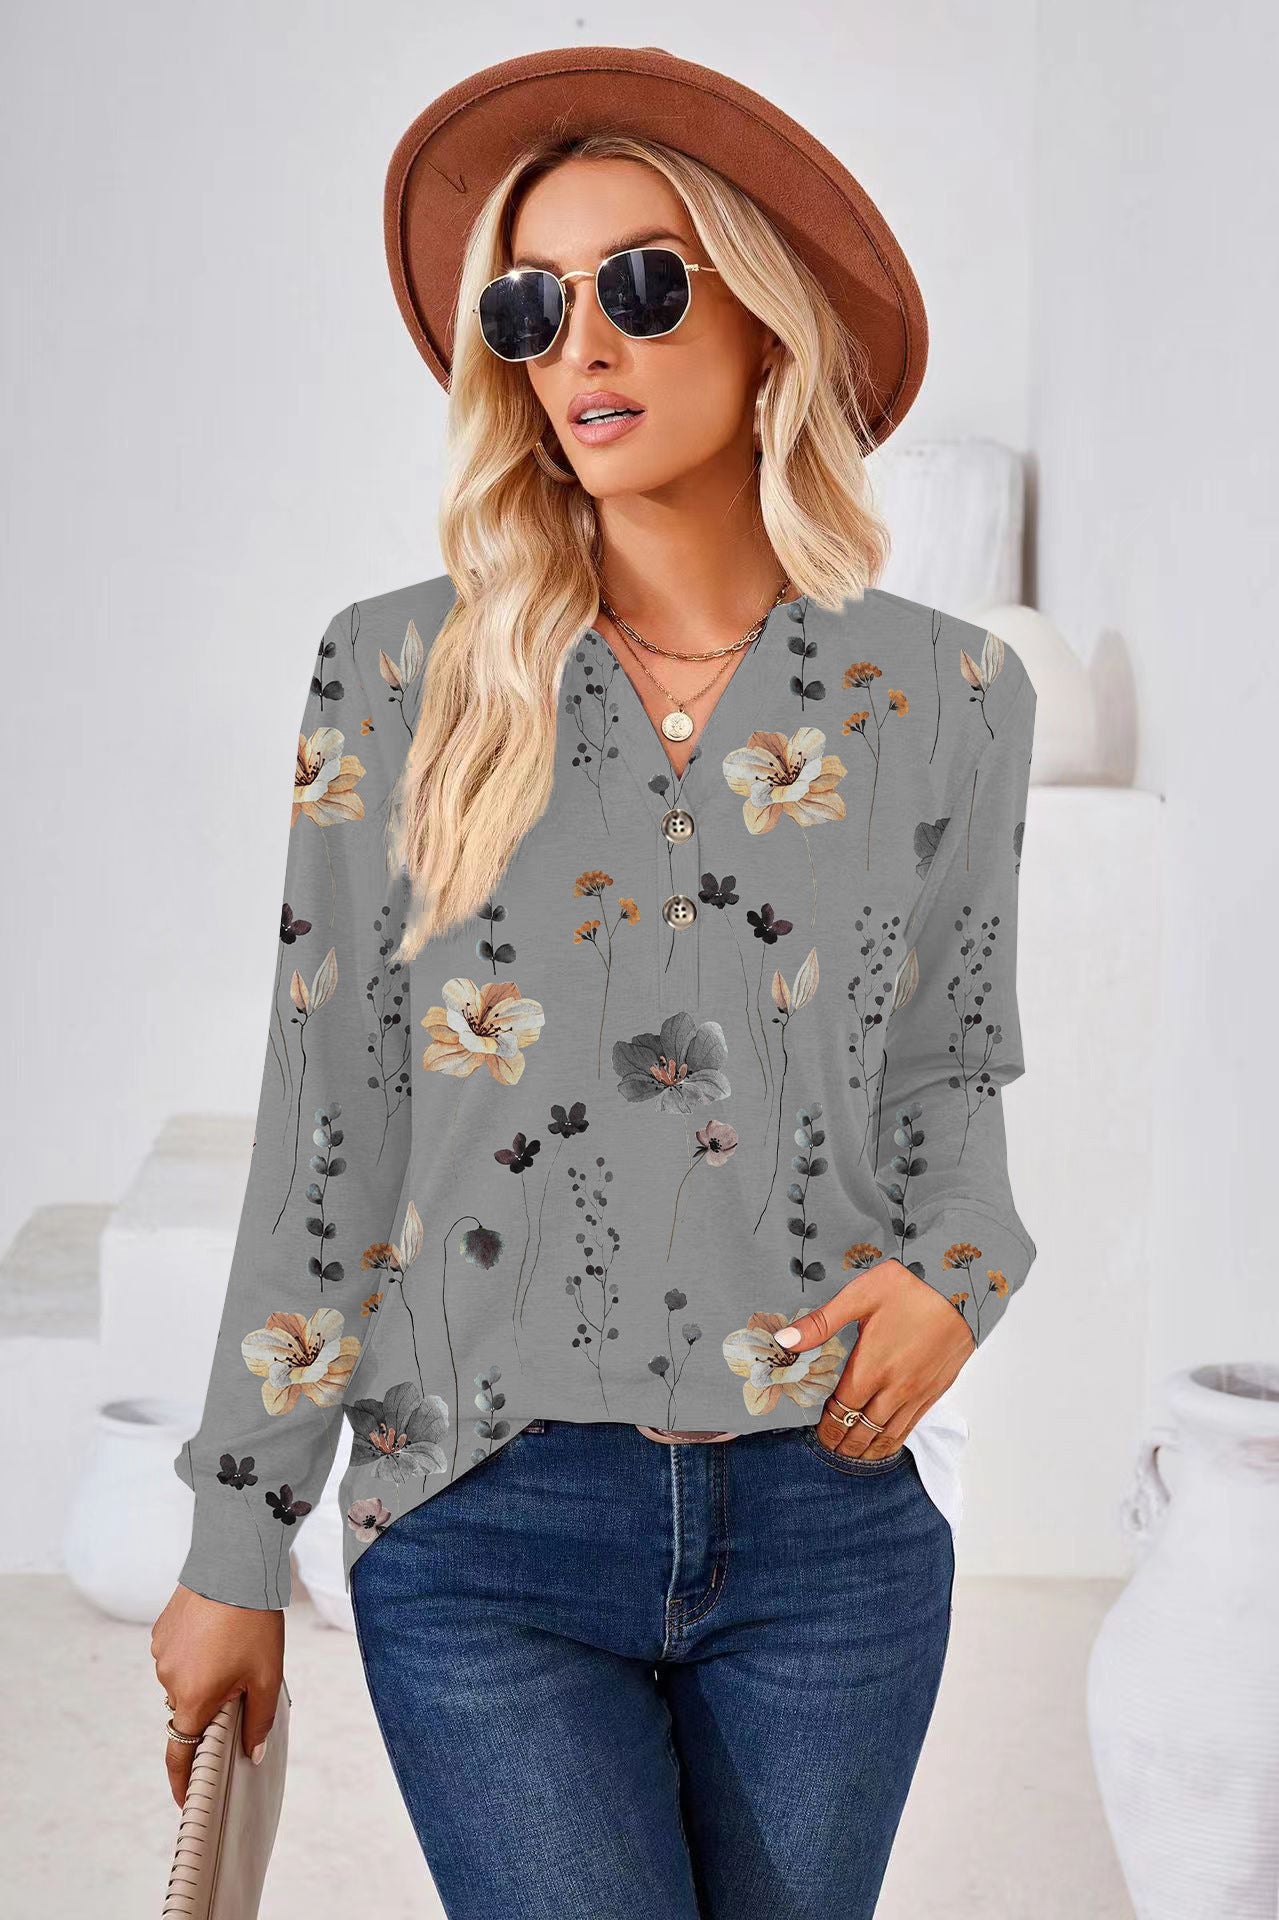 Women's Fashion Casual Printing Button V-neck Long Sleeve